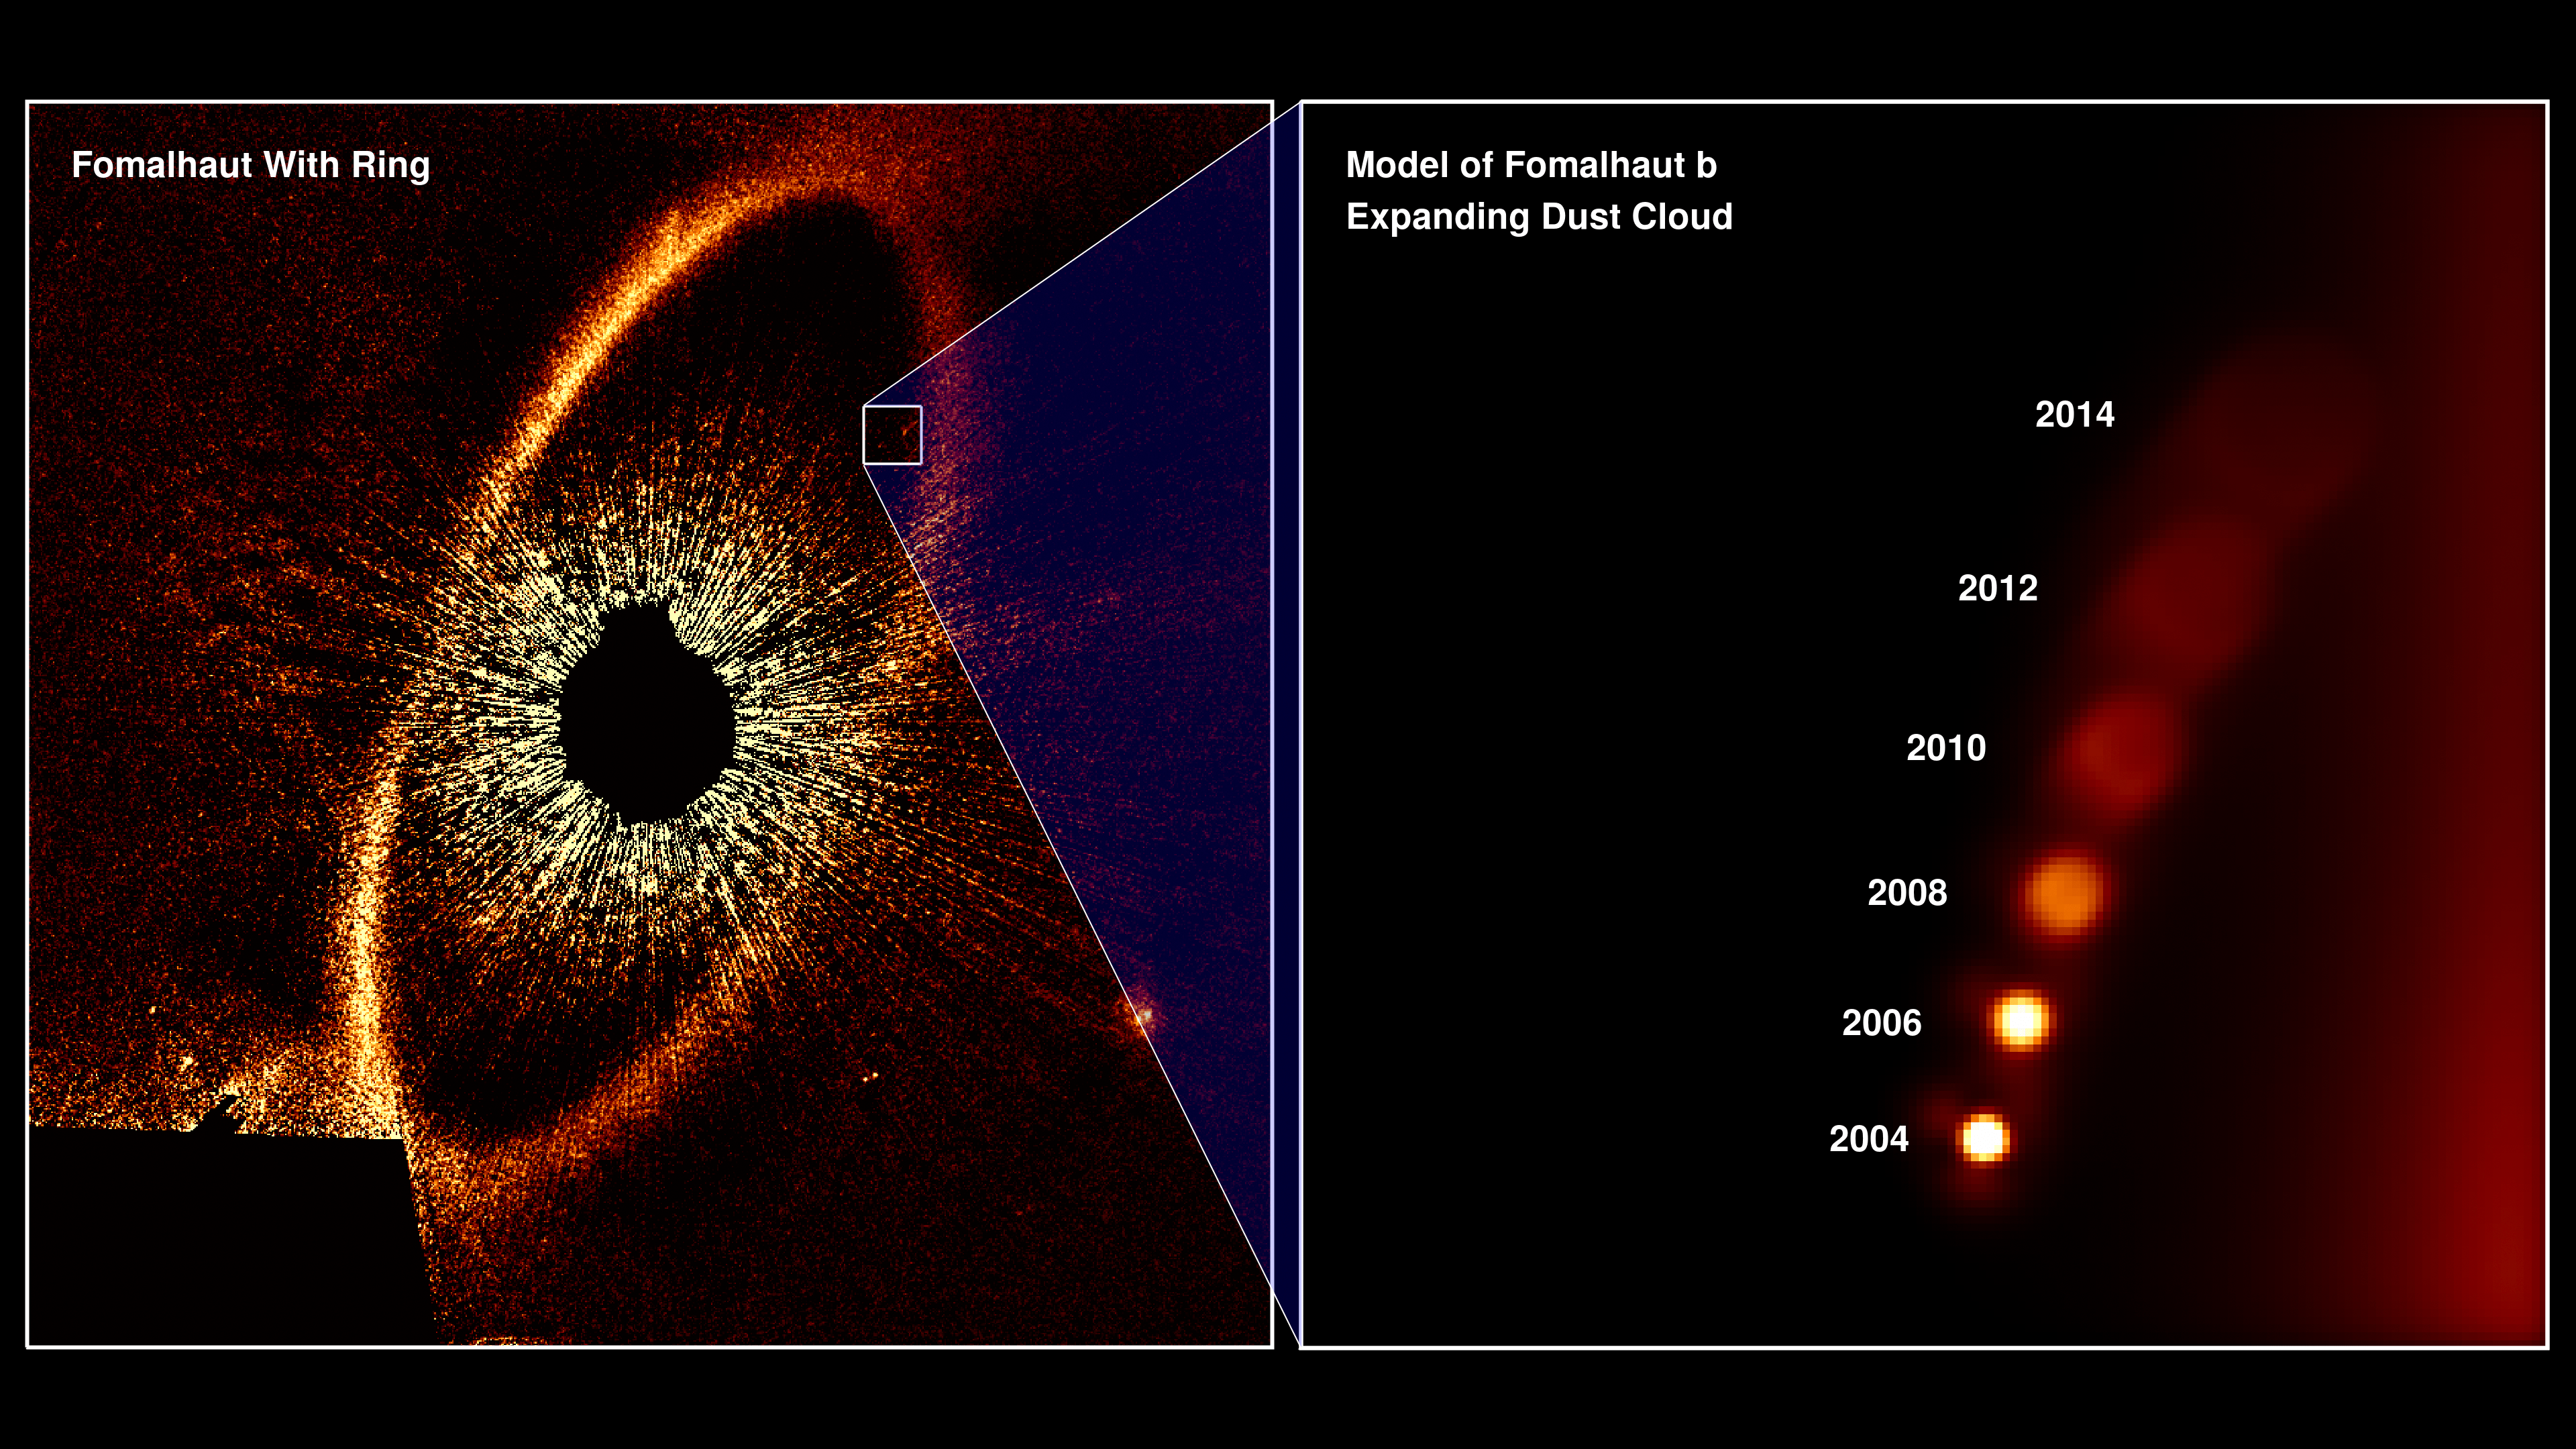 Hubble observations and data simulation of Fomalhaut star system. L